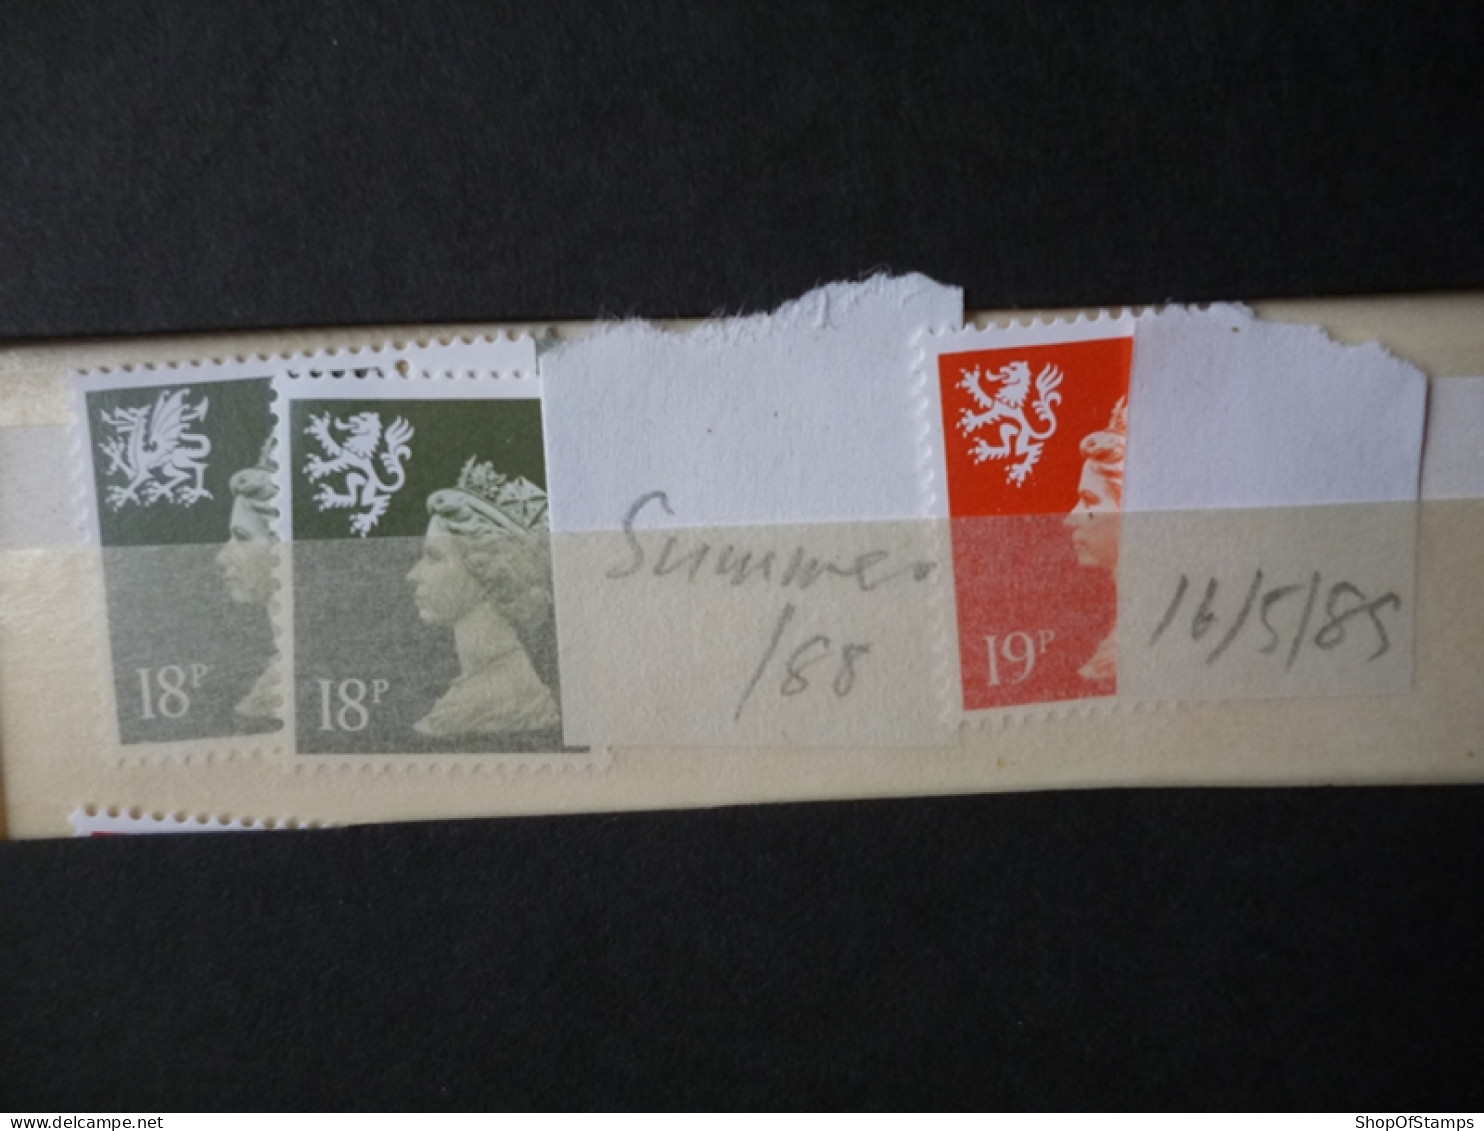 GREAT BRITAIN SG X 1989 16.5.89 19p REGIONAL DEFI ISSUE FROM GPO IN ENVELOPE - Franking Machines (EMA)